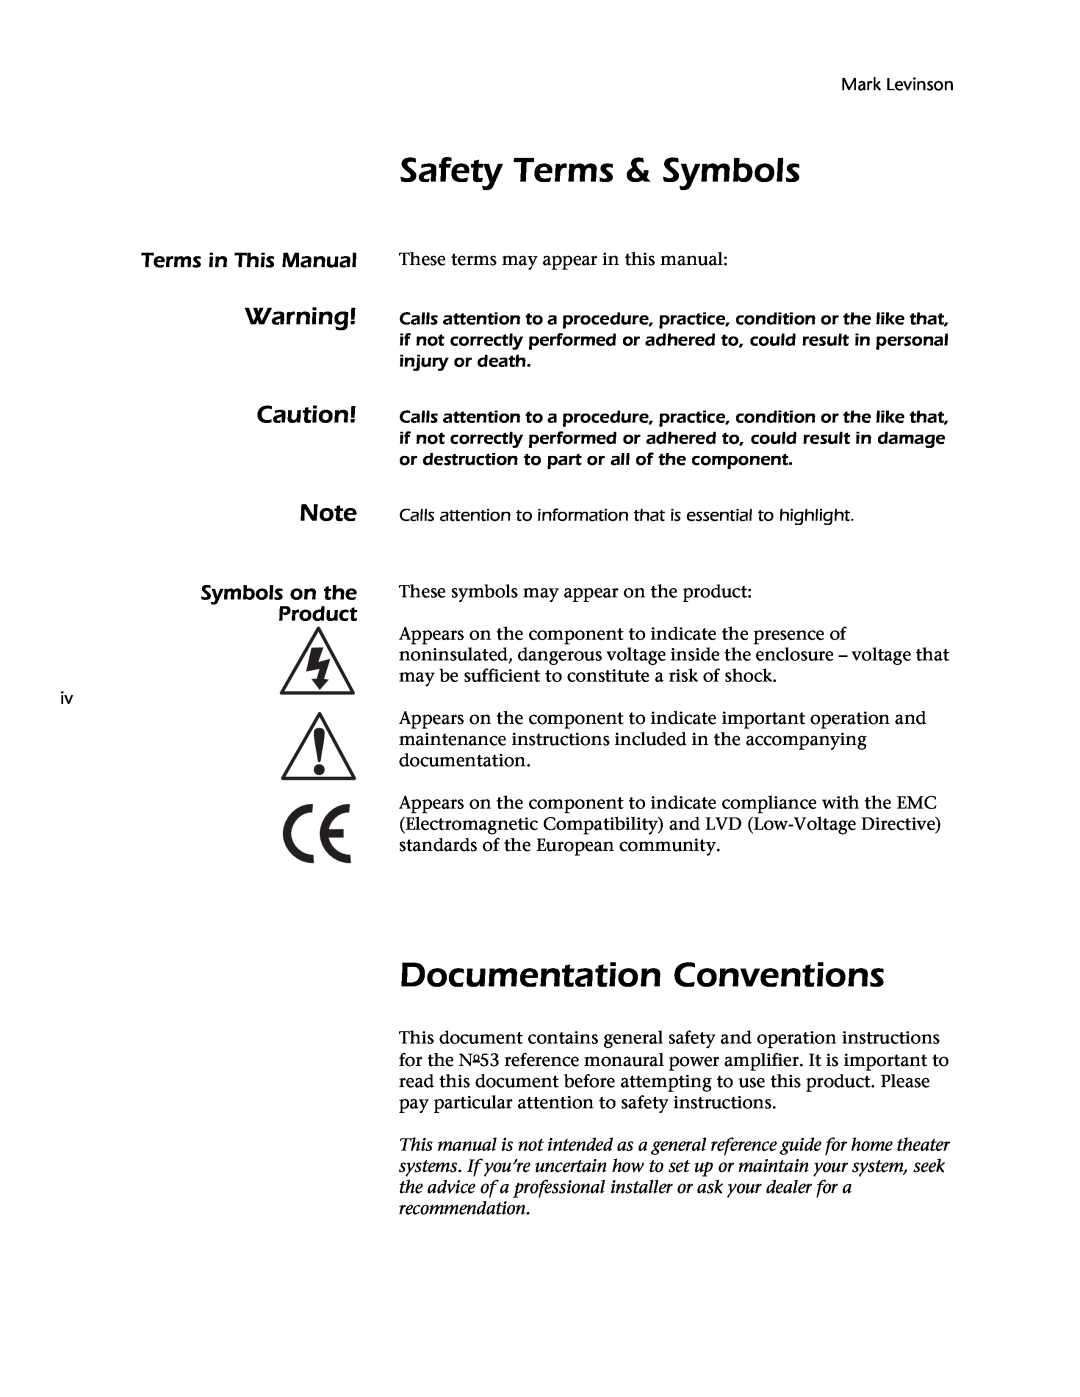 Mark Levinson 53 Safety Terms & Symbols, Documentation Conventions, Terms in This Manual, Symbols on the Product 